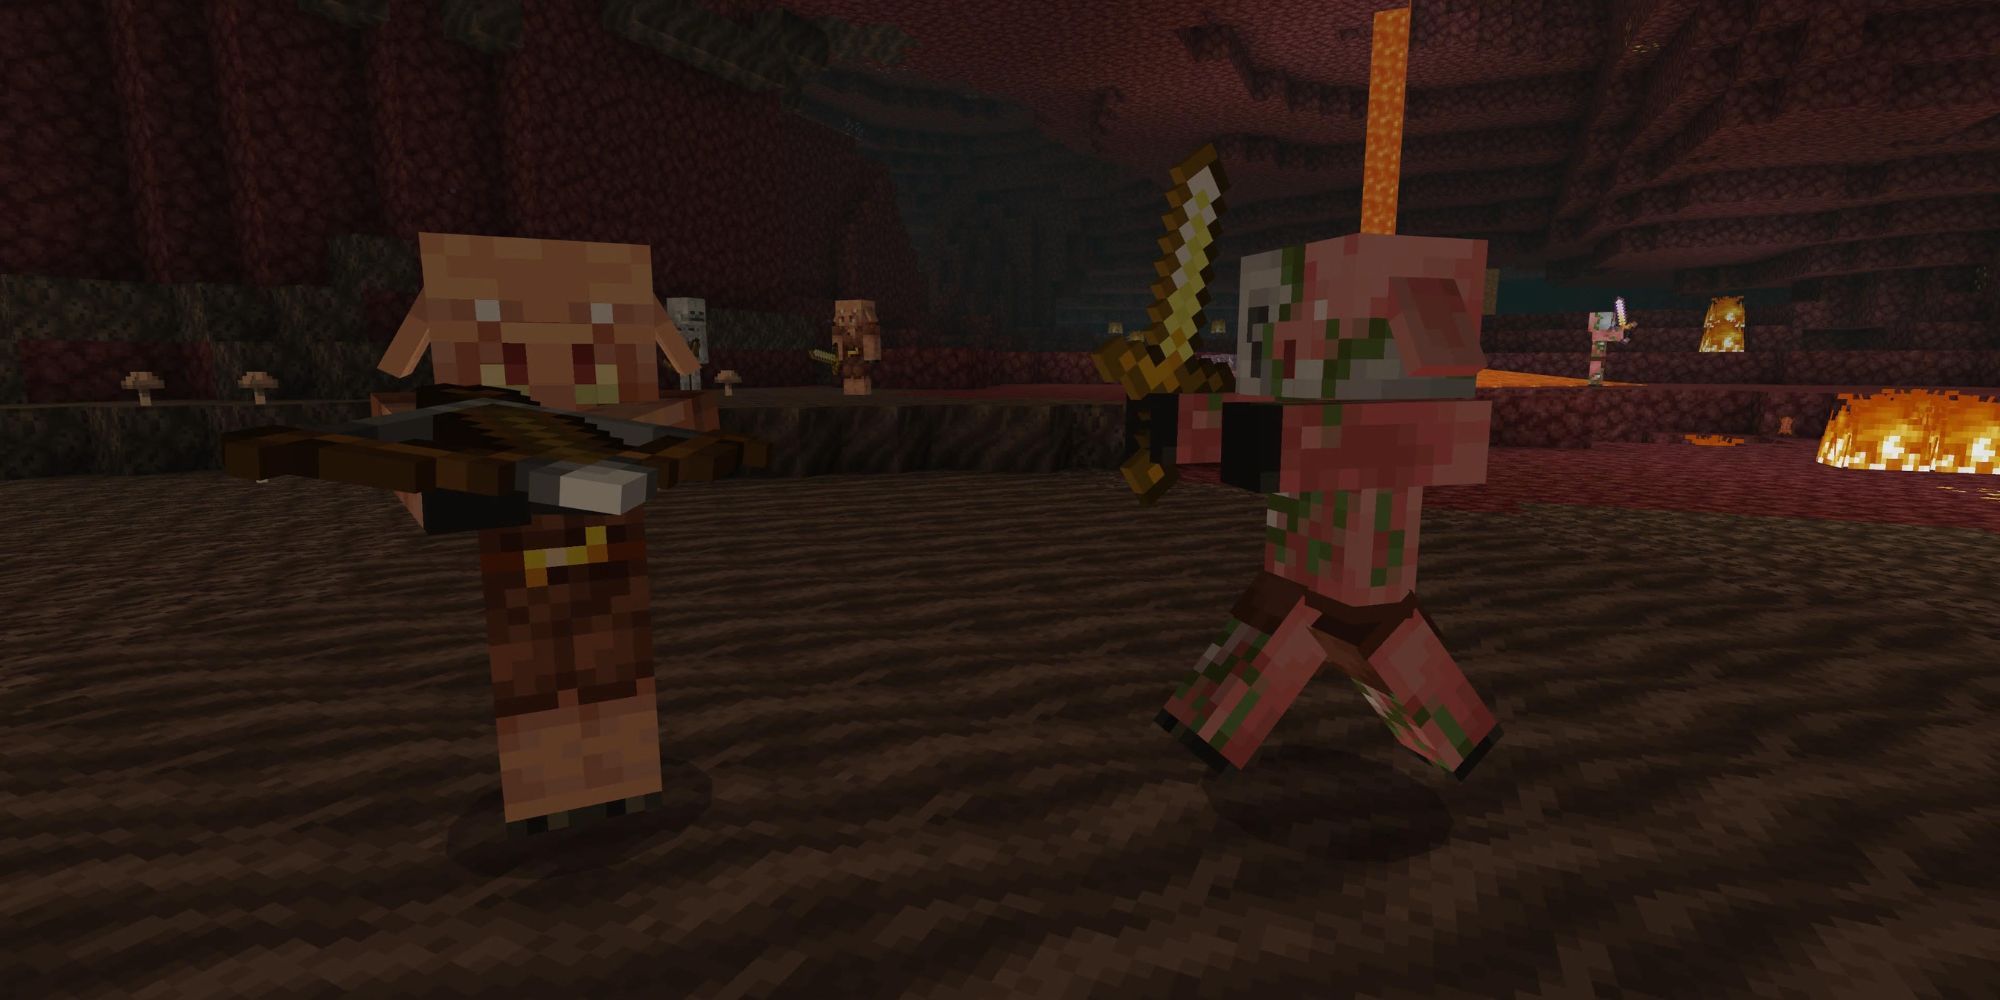 A Piglin and a Zombie Piglin standing next to each other in the Nether in Minecraft